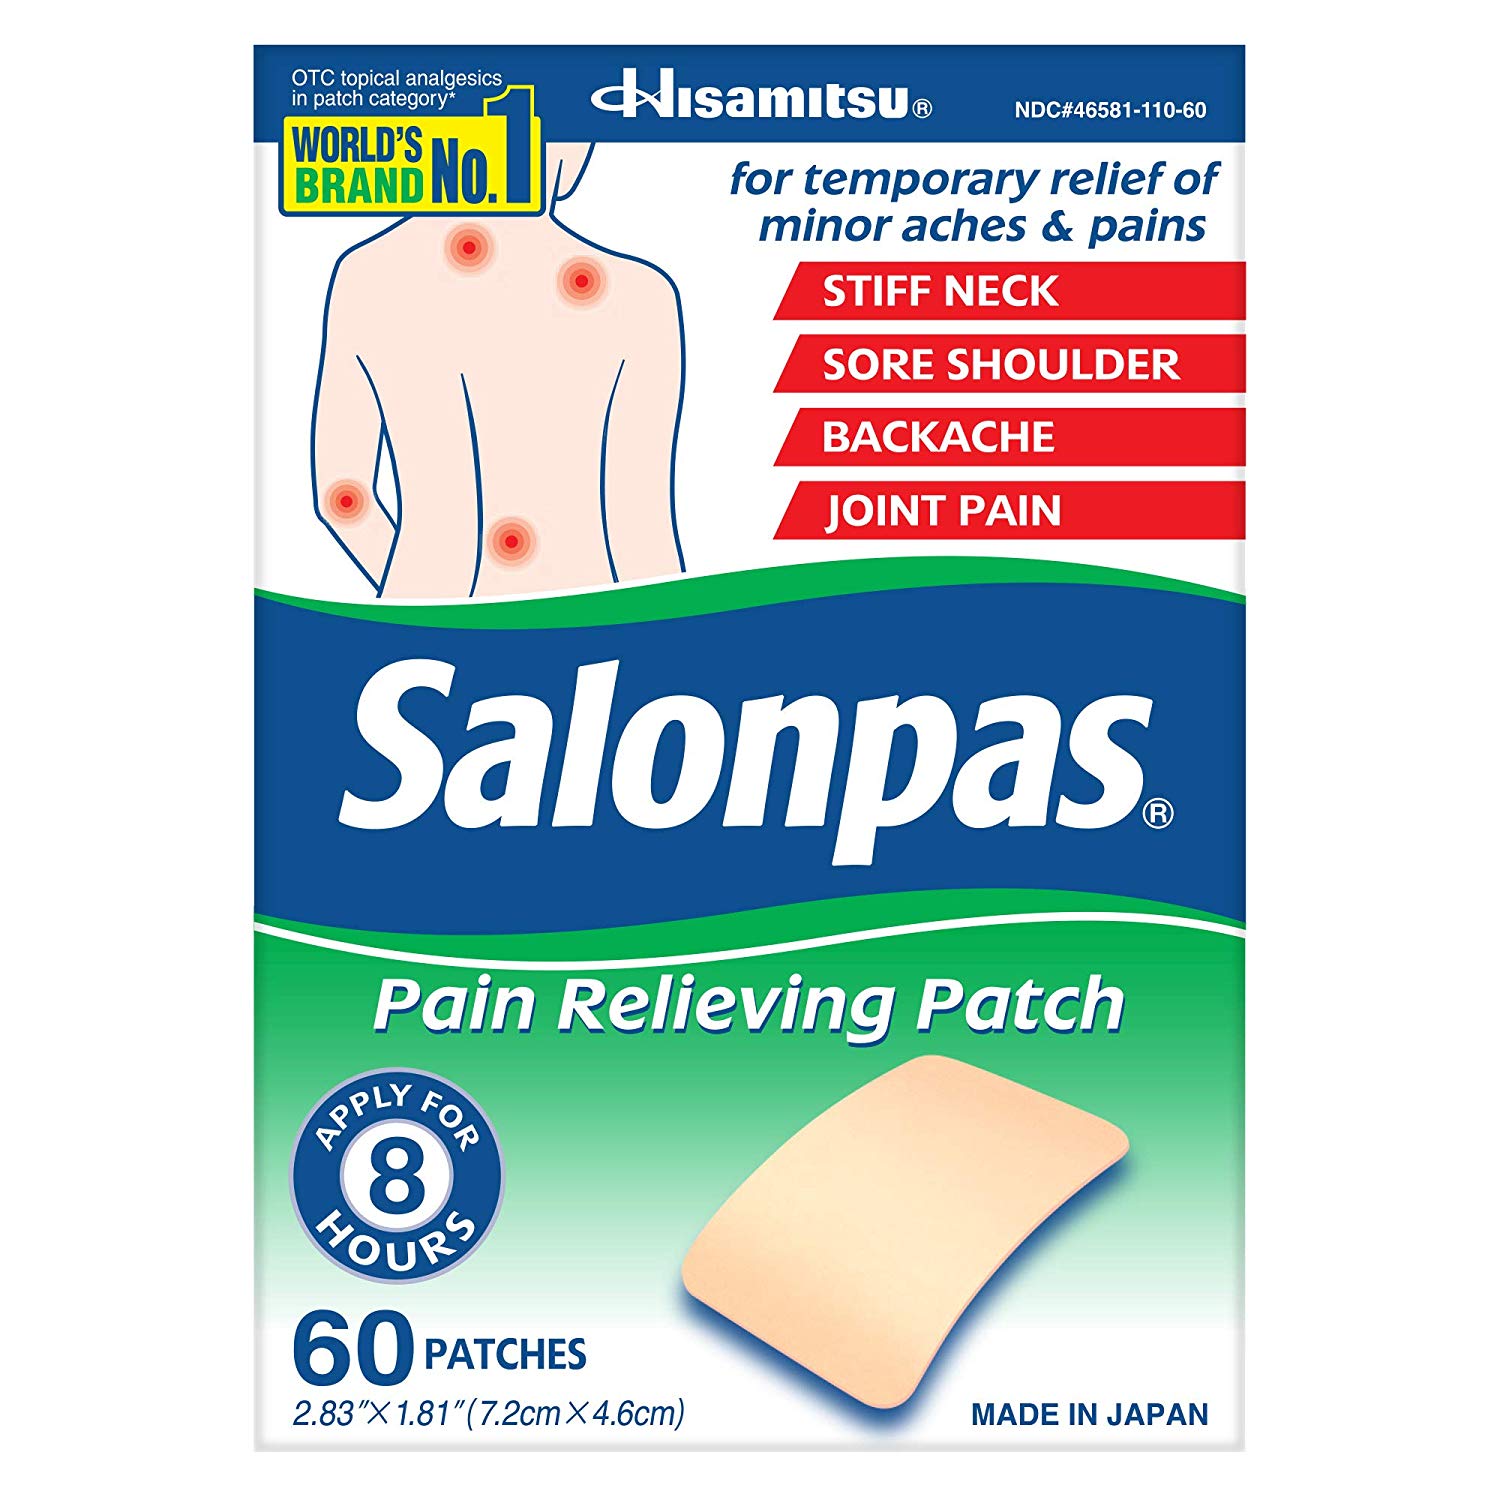 Salonpas pain relief patches make a great gift for people with scoliosis.